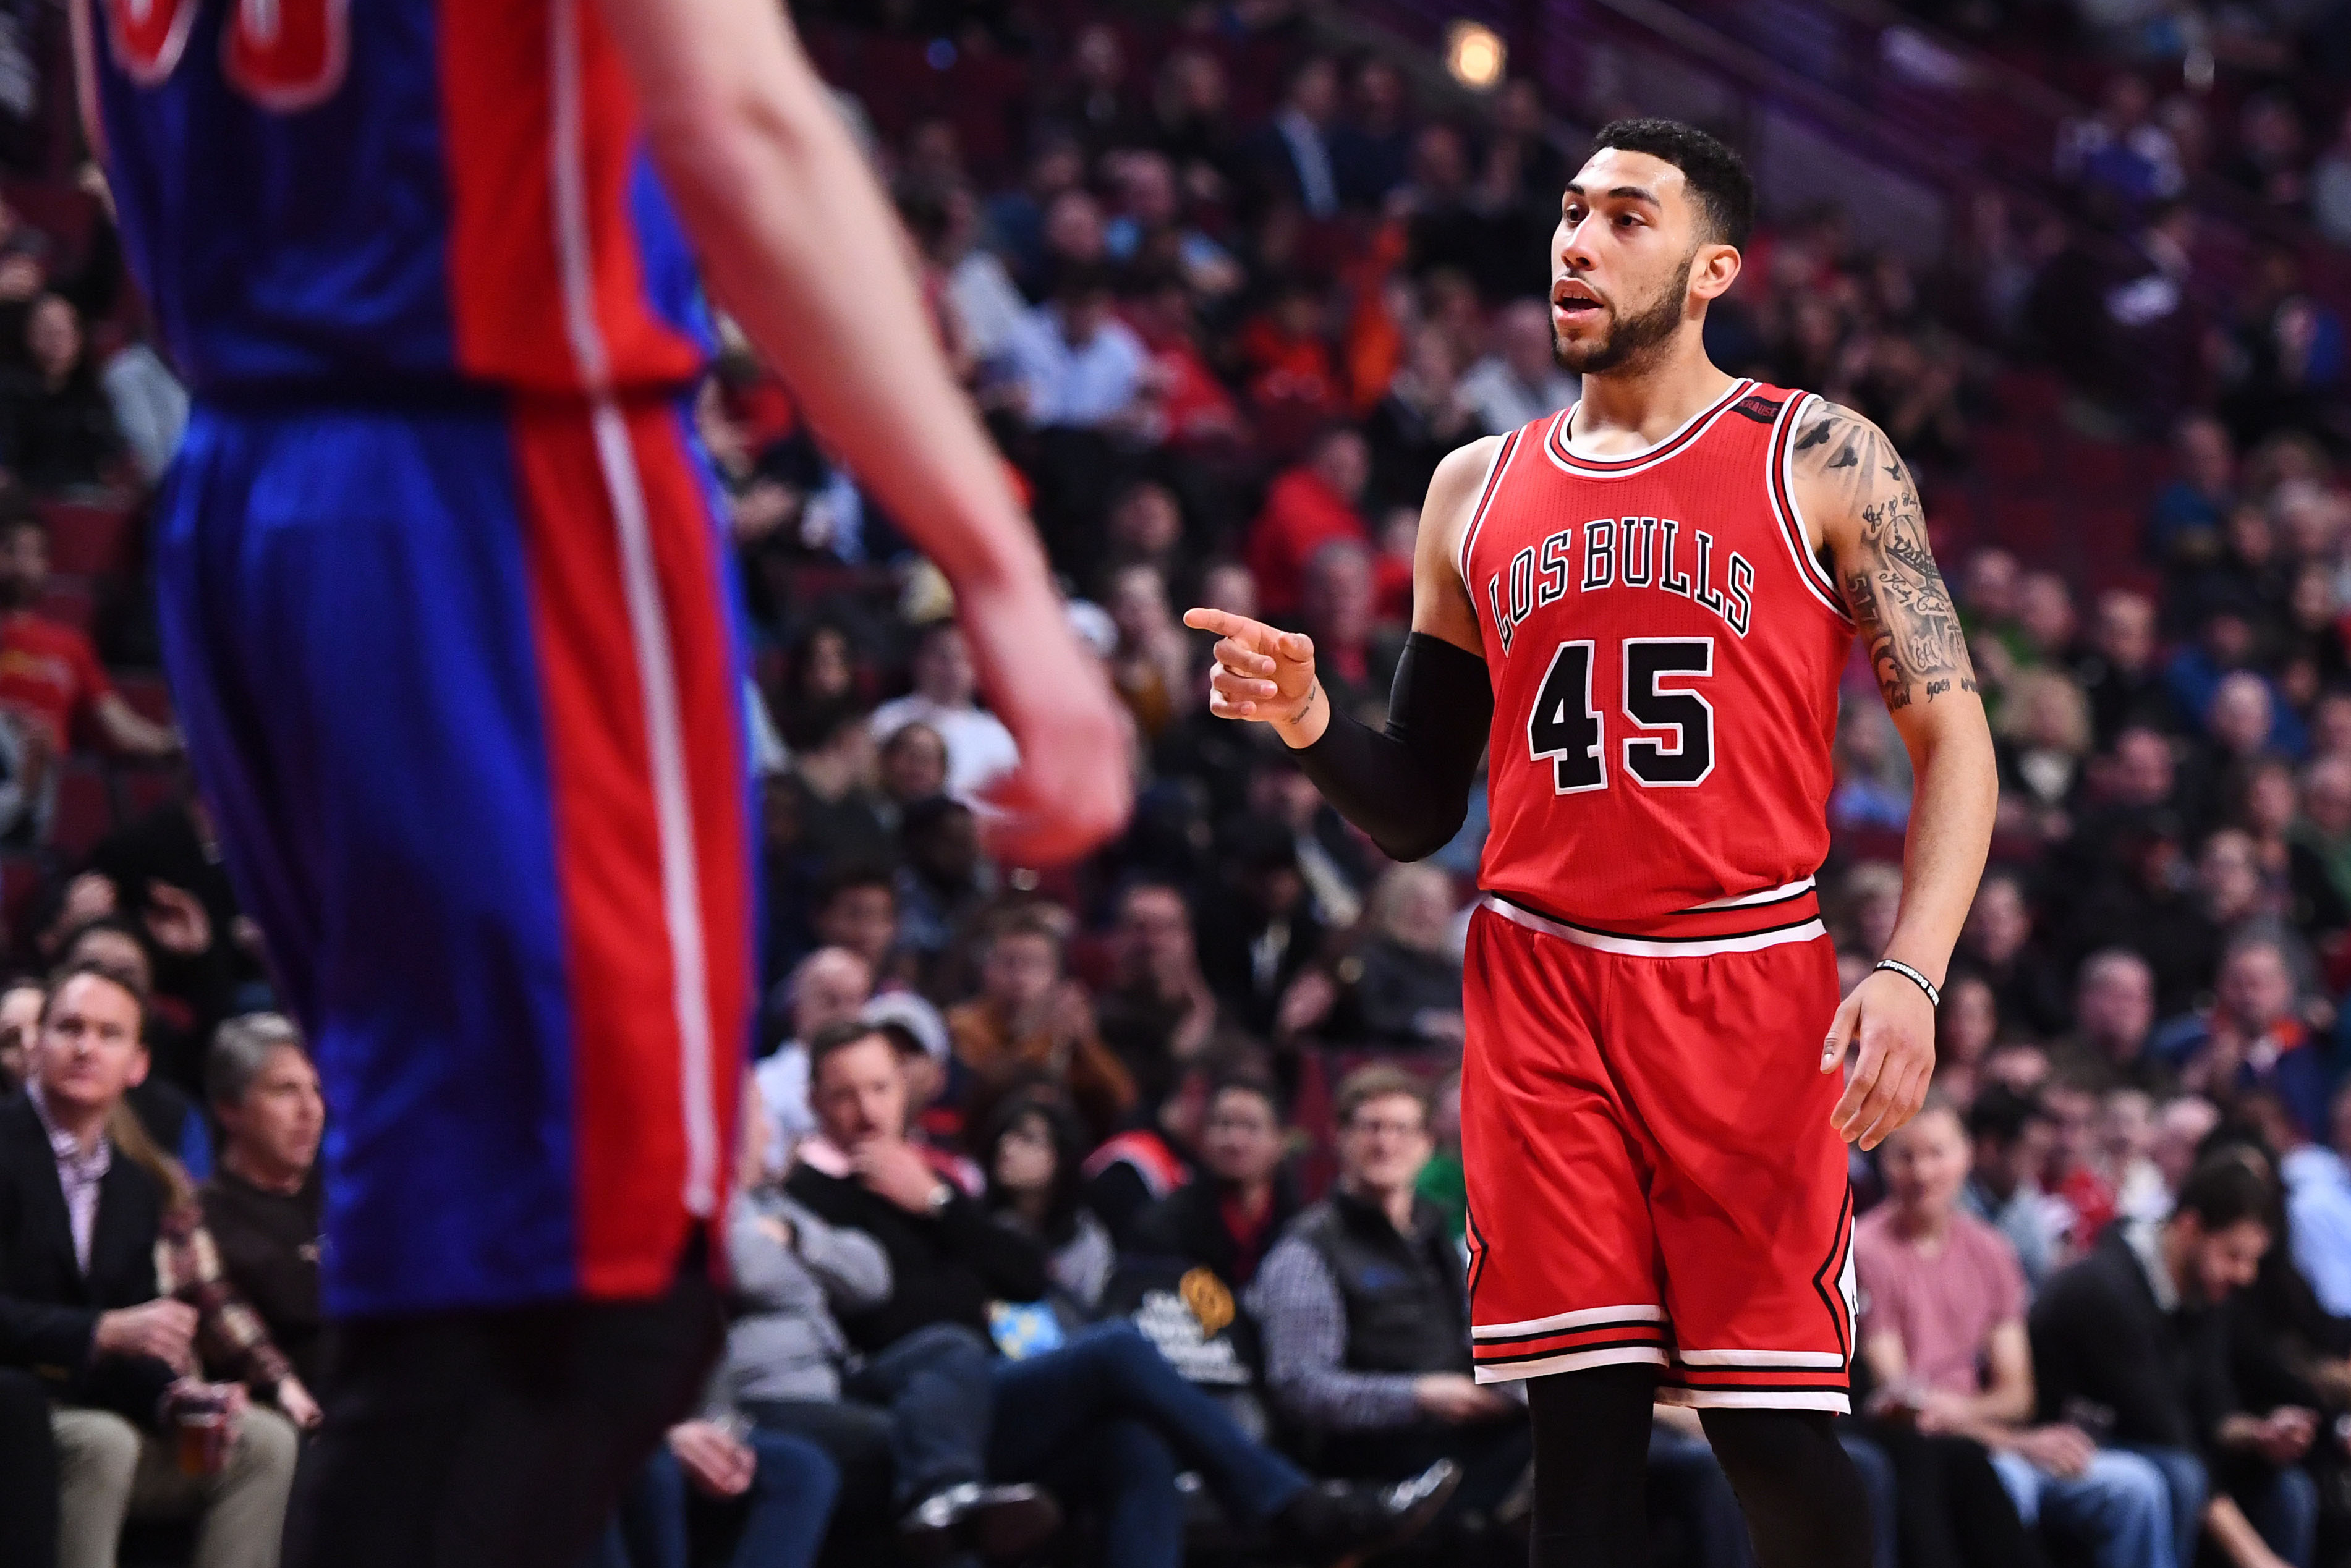 Denzel Valentine - NBA Shooting guard - News, Stats, Bio and more - The  Athletic